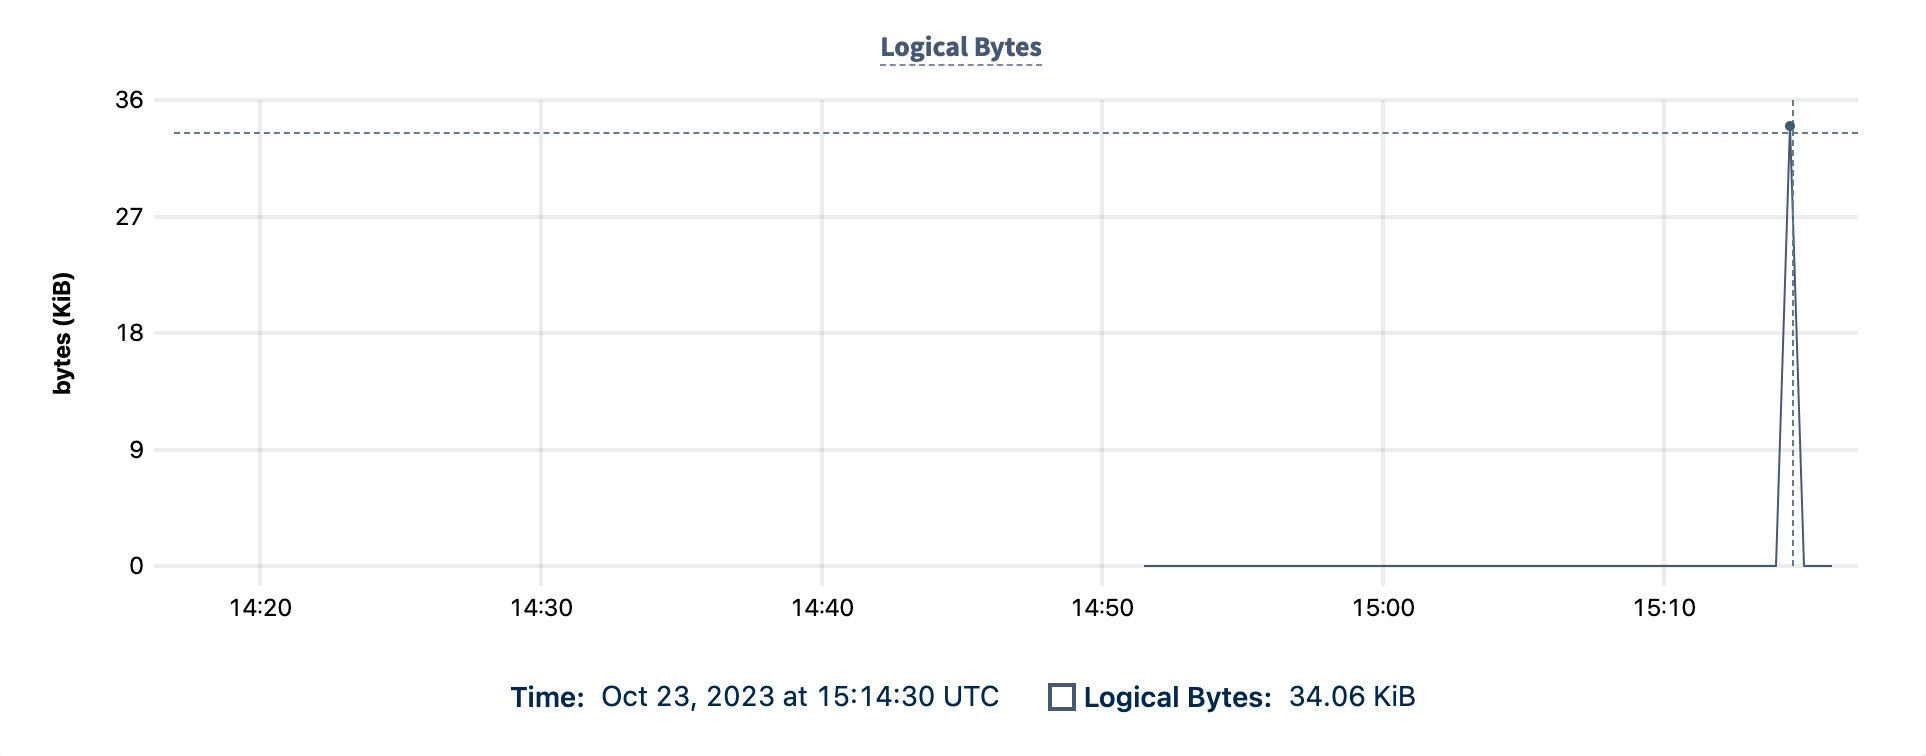 DB Console Logical Bytes graph showing results over the past hour